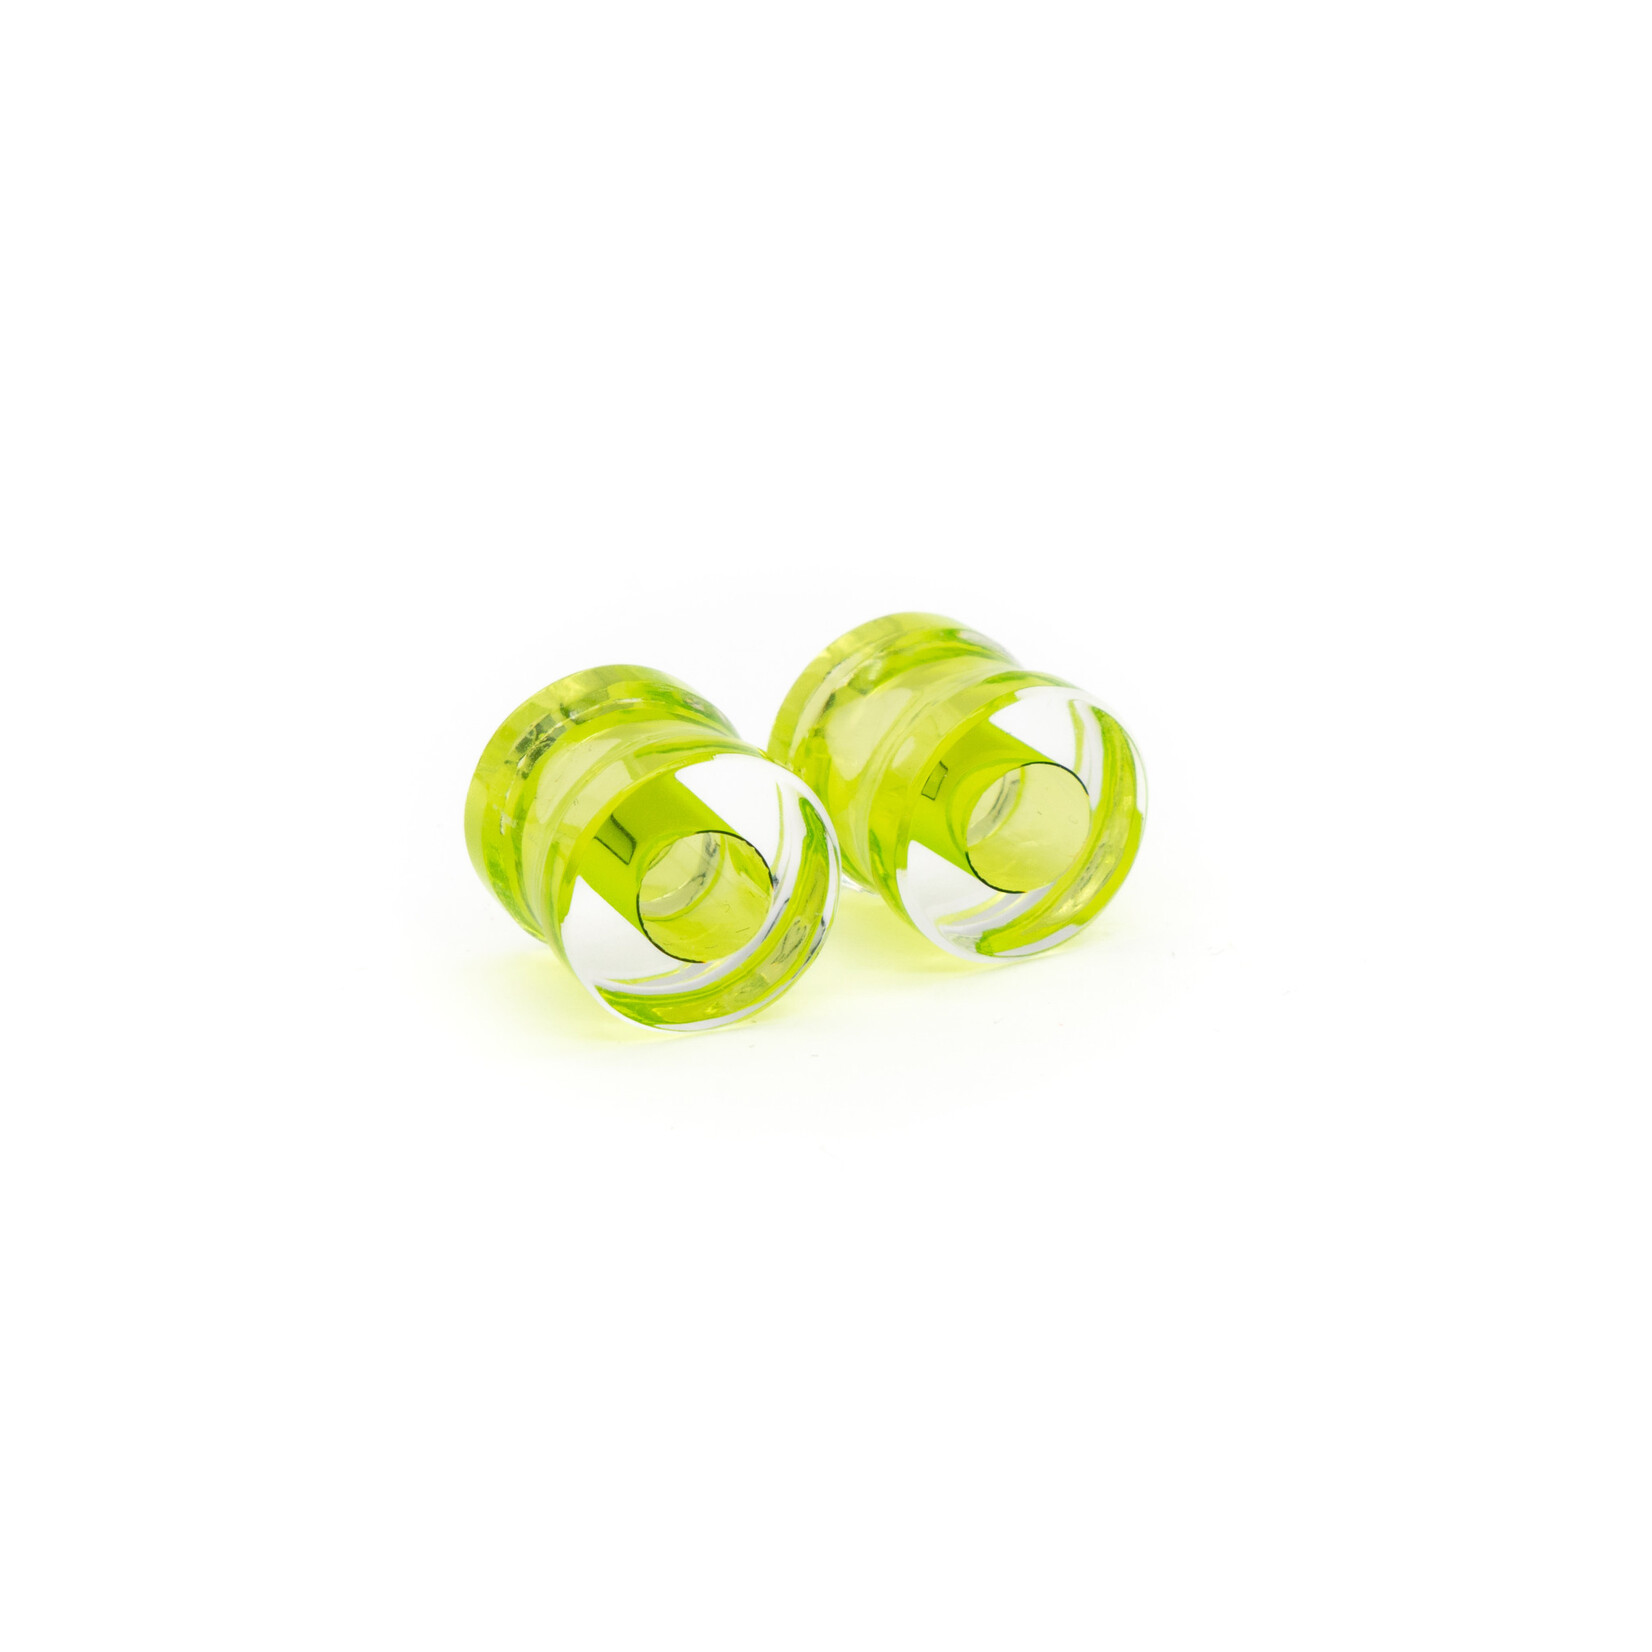 Gorilla Glass Double Flare (DF) Glass Plugs - Lifesaver Lime Green (Pair)